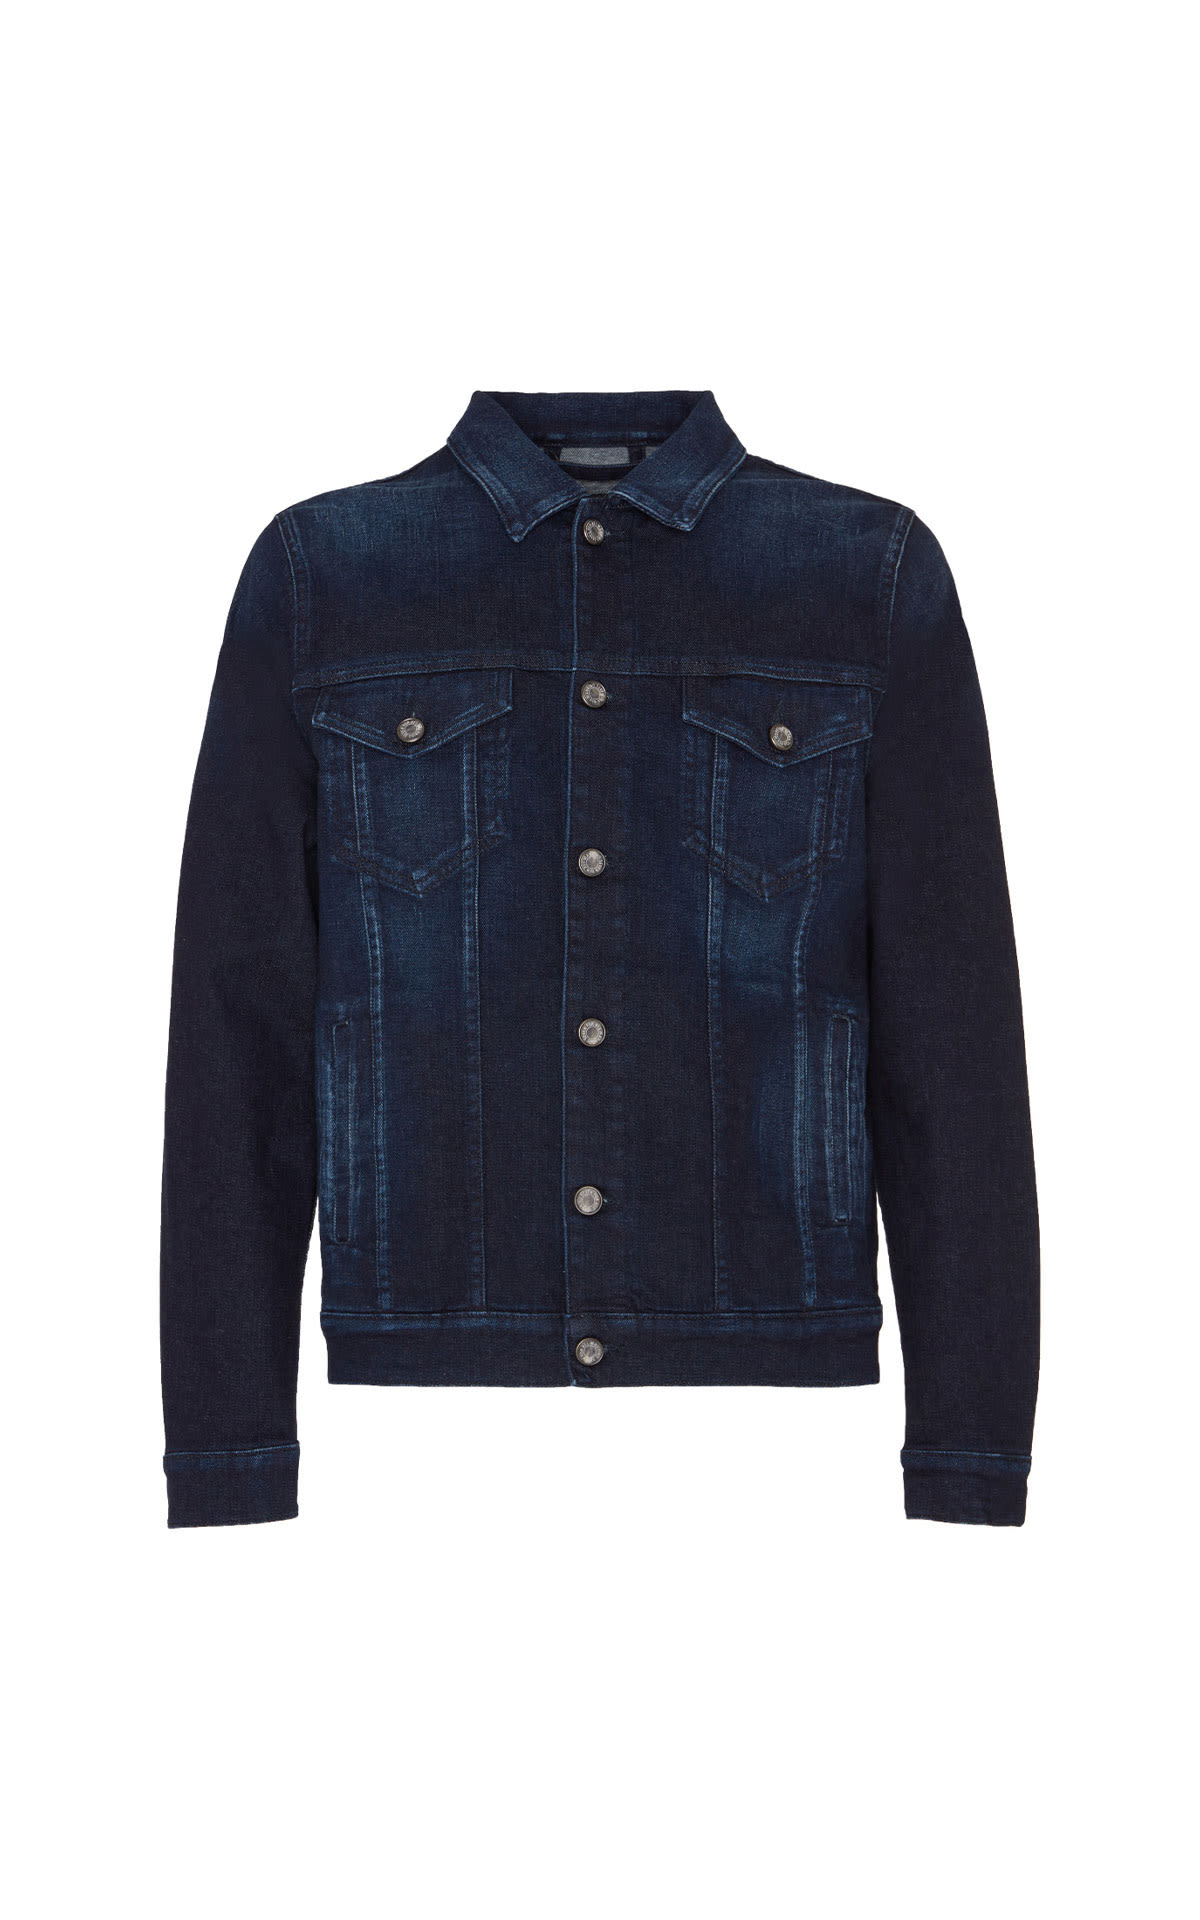 7 For All Mankind Perfect jacket cadarblu from Bicester Village